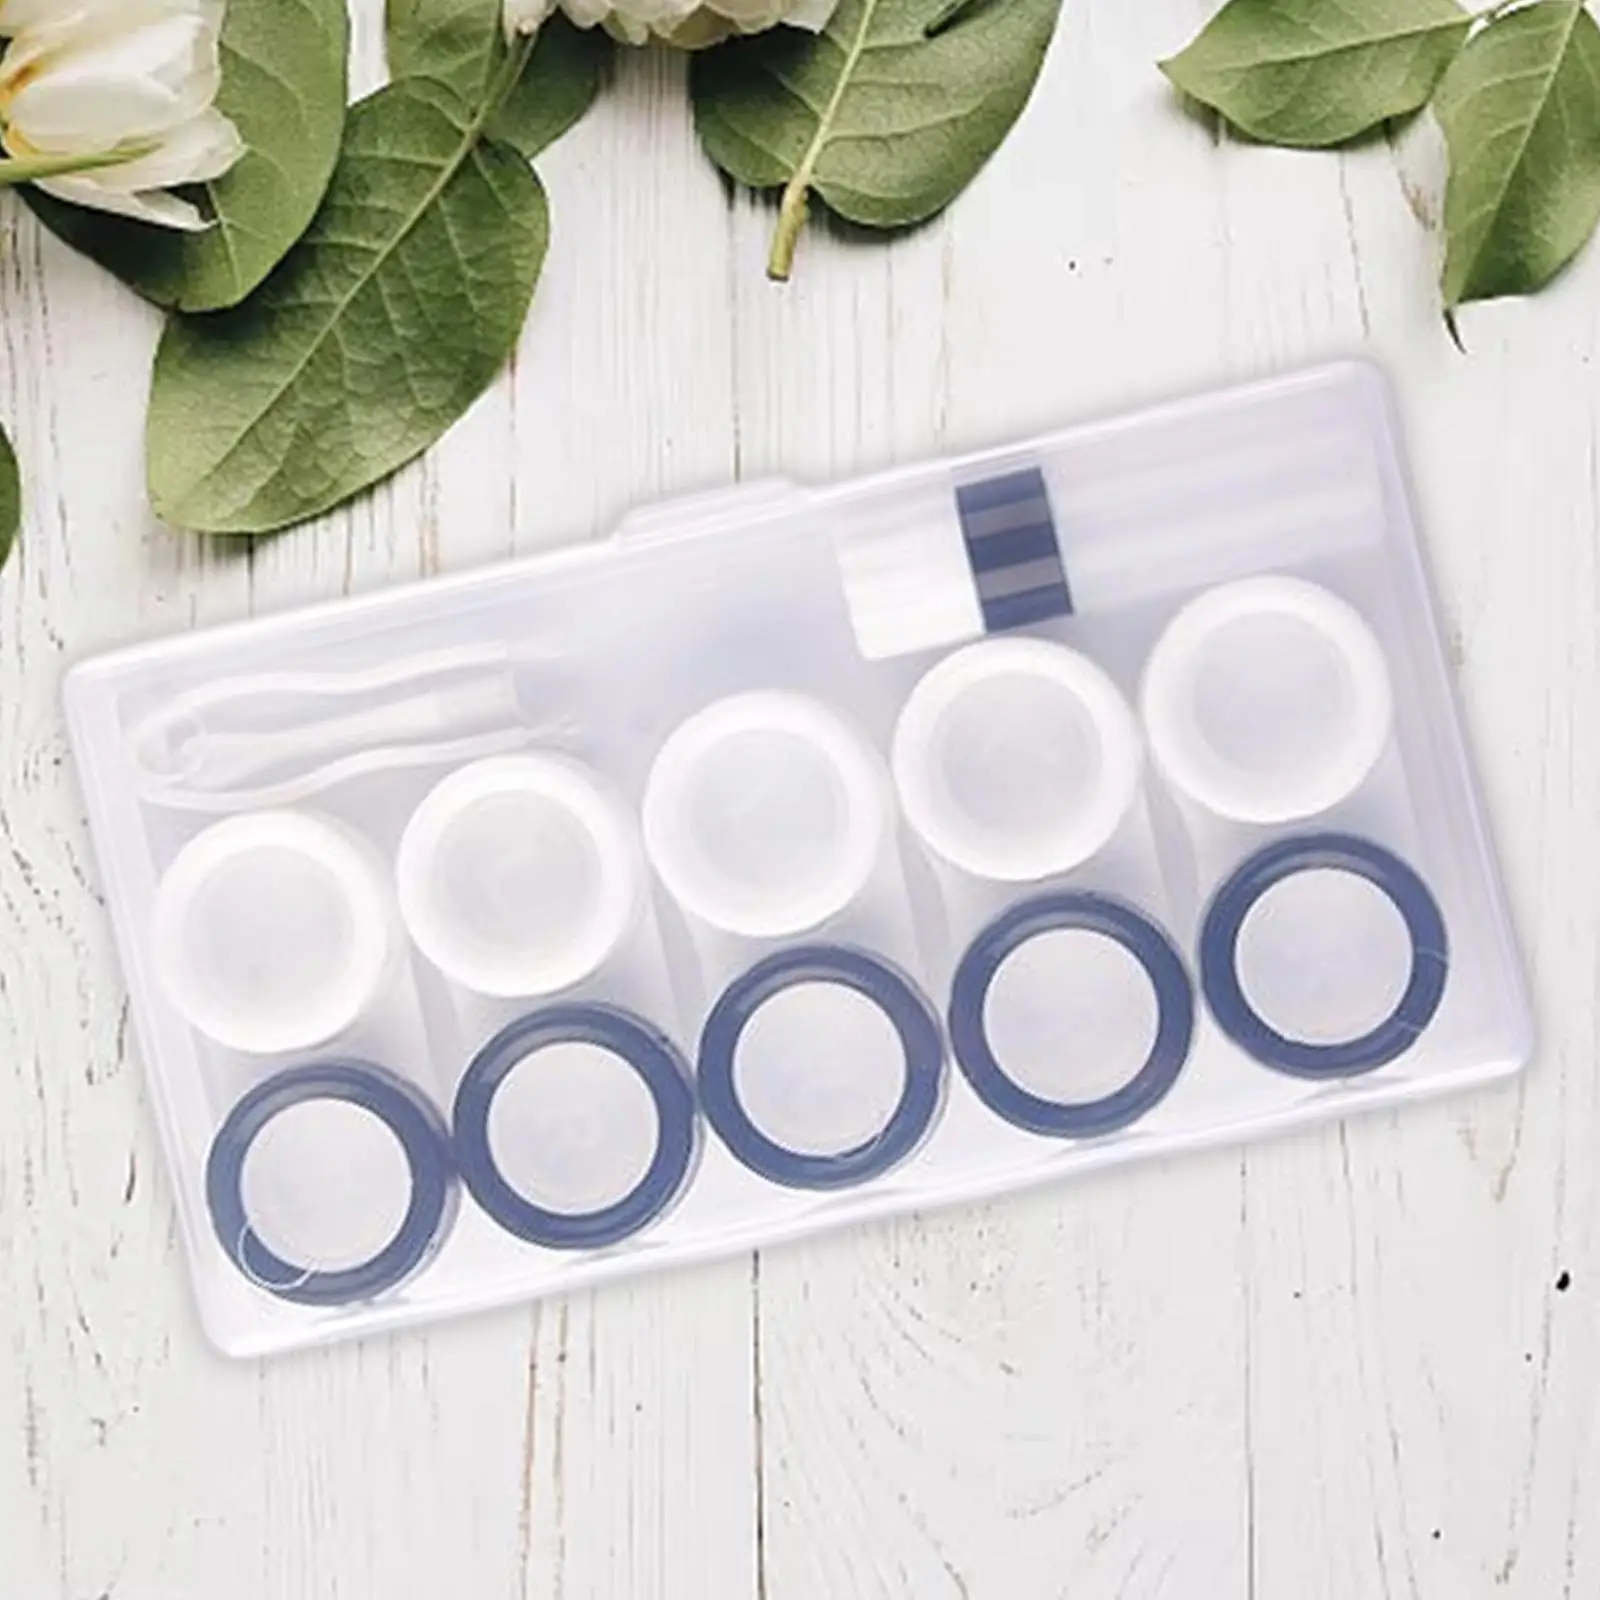 5X 5 Pairs Contact Lens Storage Case Organizer Caps for Girls